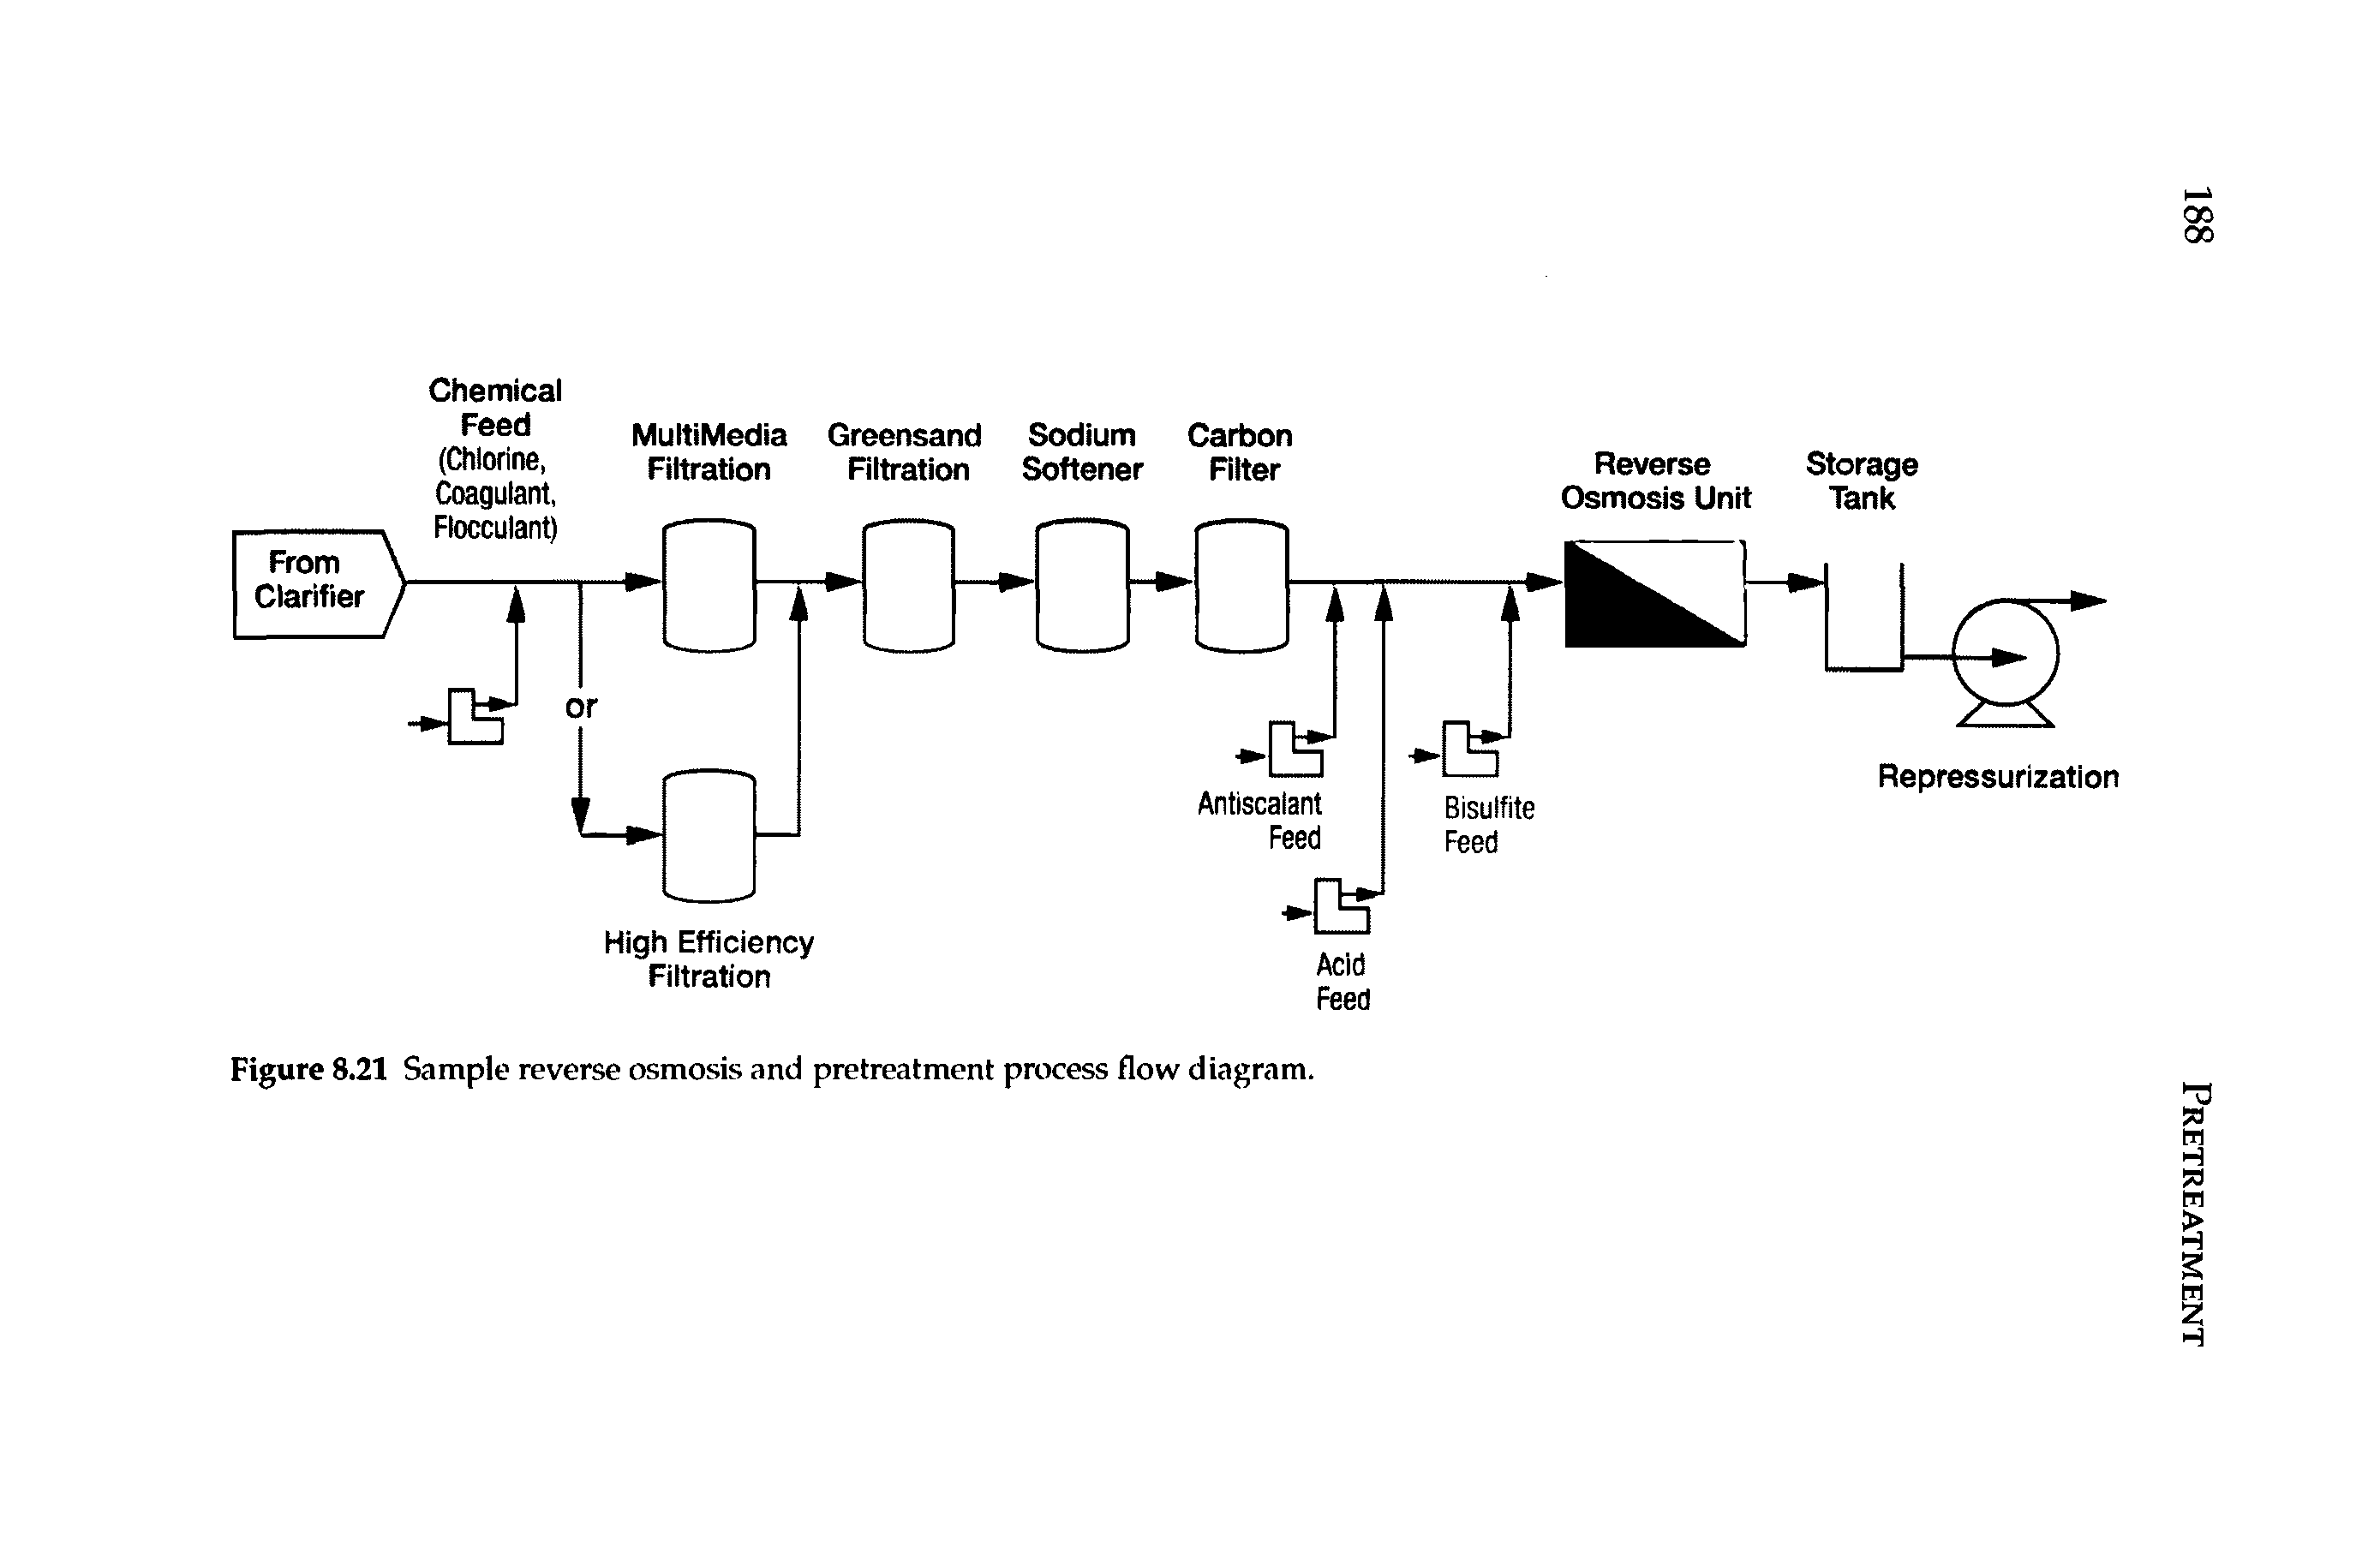 Figure 8.21 Sample reverse osmosis and pretreatment process flow diagram.